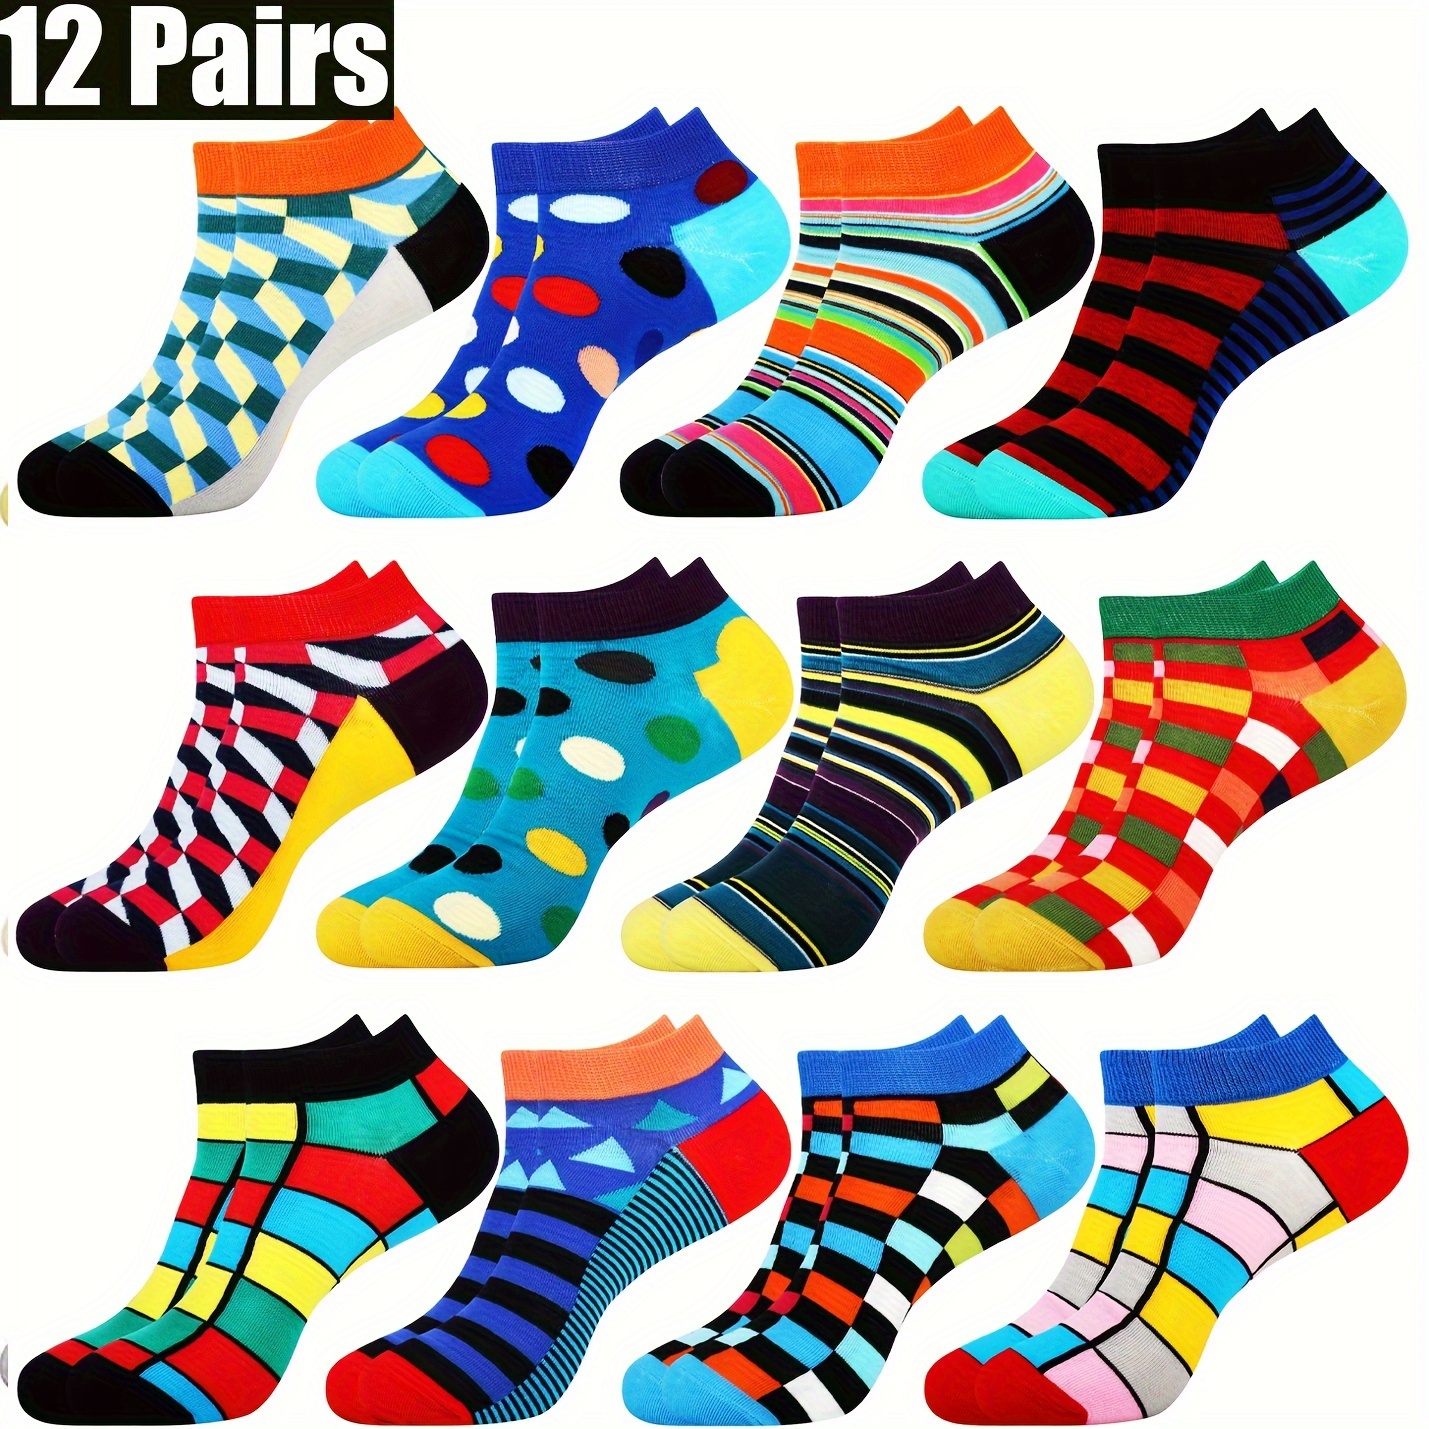 

12 Pairs Of Men's Colorful Striped Various Pattern Liner Anklets Socks, Comfy Breathable Soft Sweat Absorbent Socks For Men's Outdoor Wearing